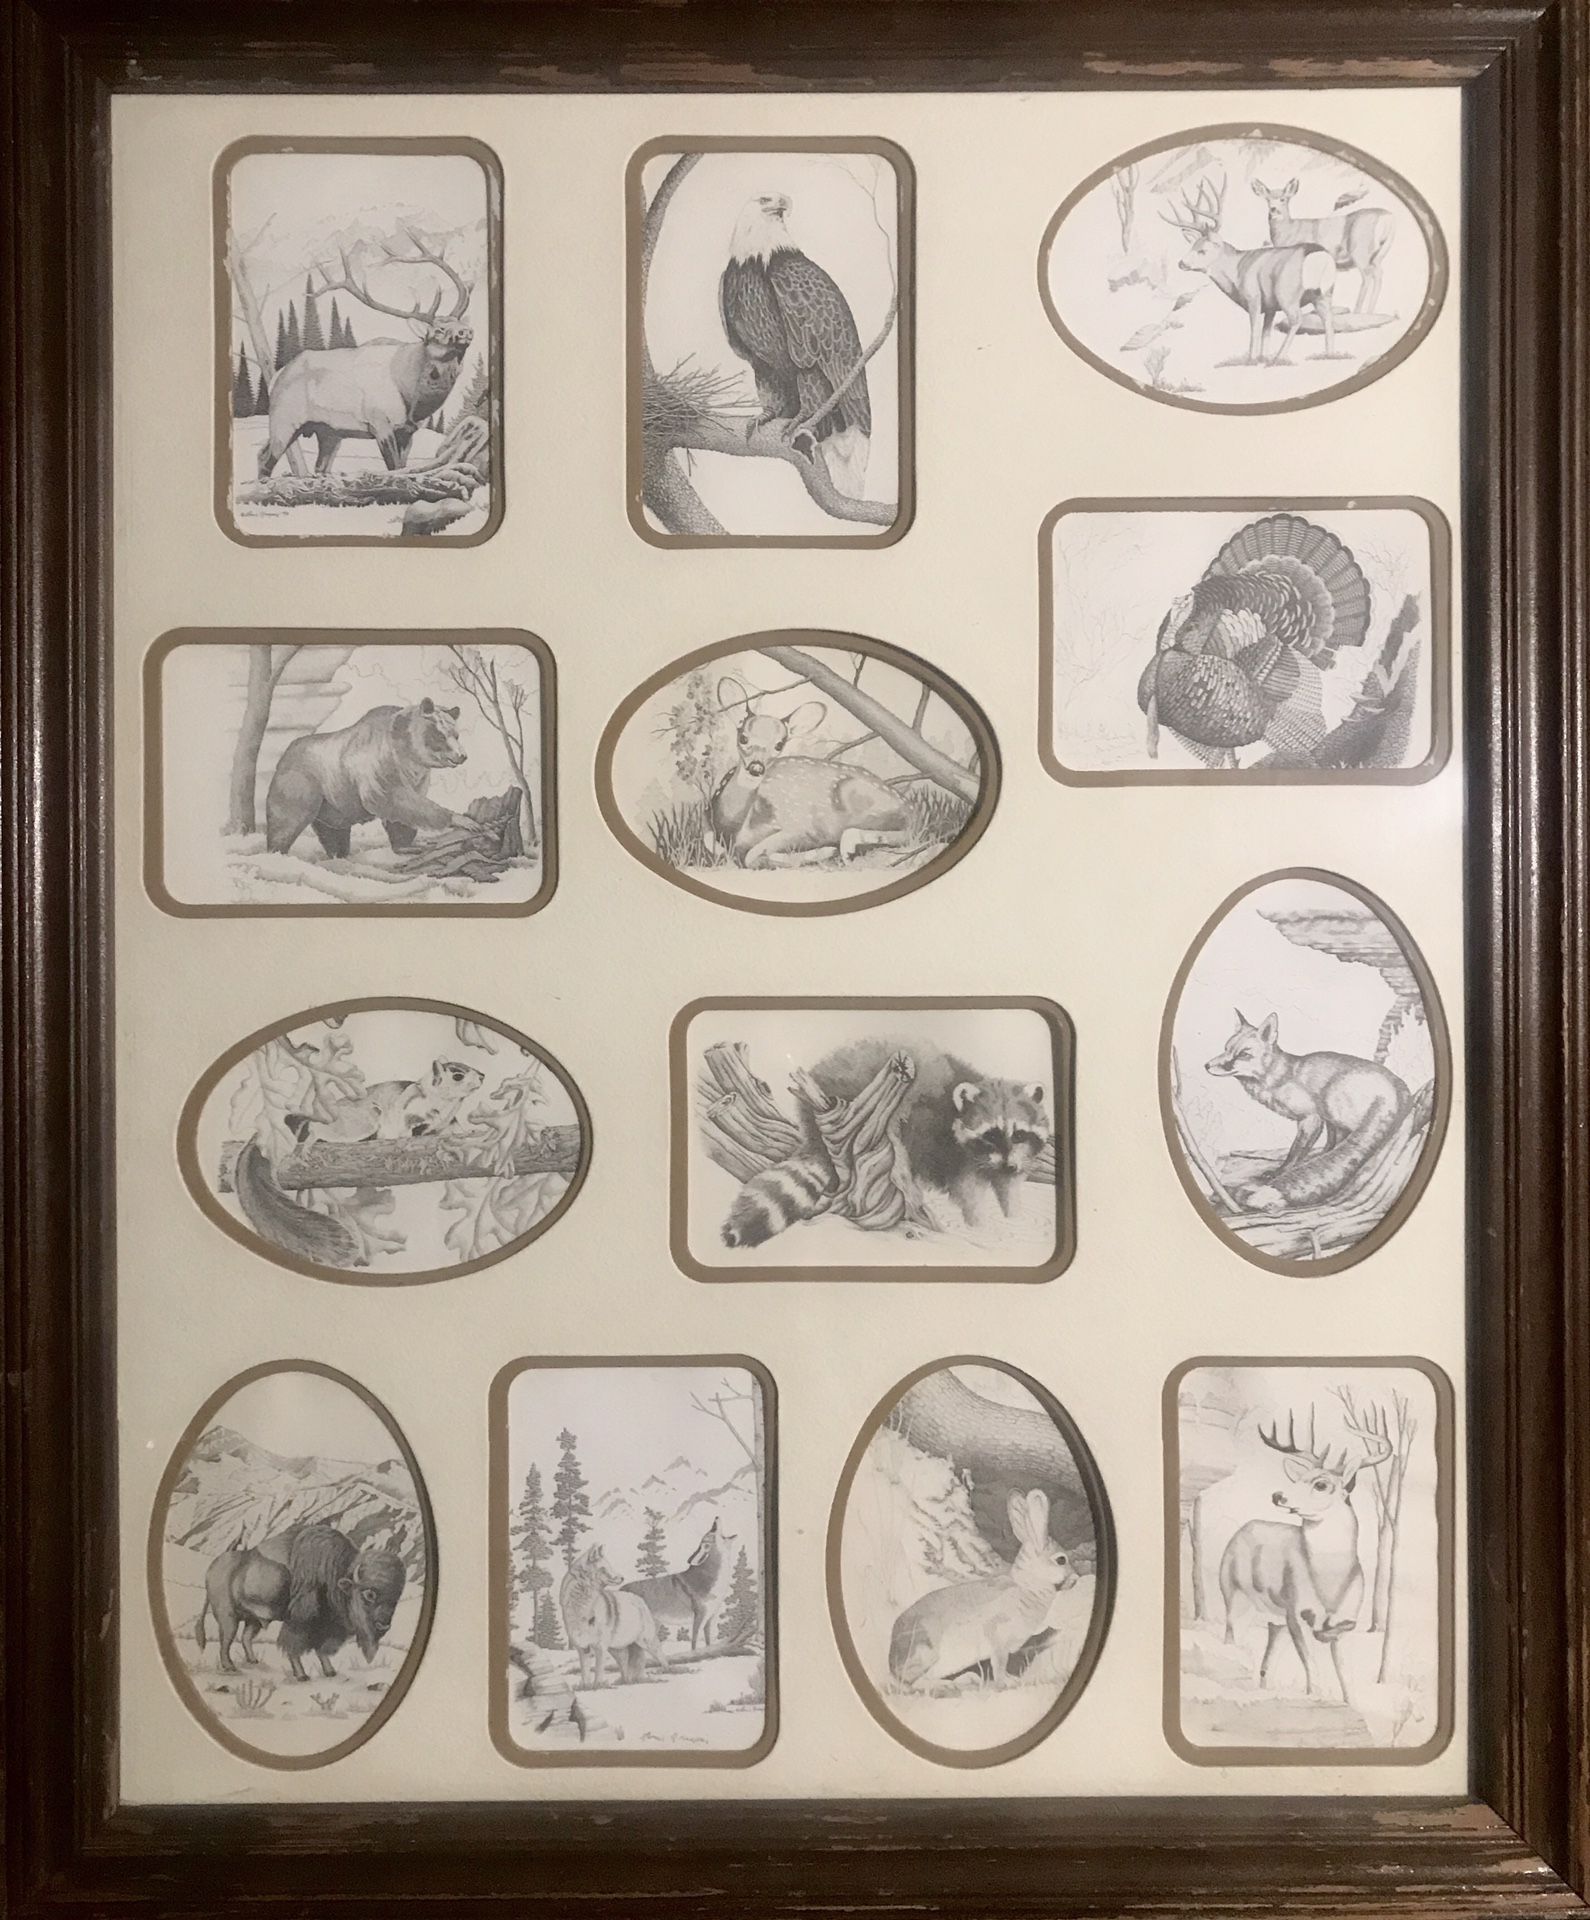 PEN &INK ART OF ANIMALS IN NATURE IN WOOD FRAME